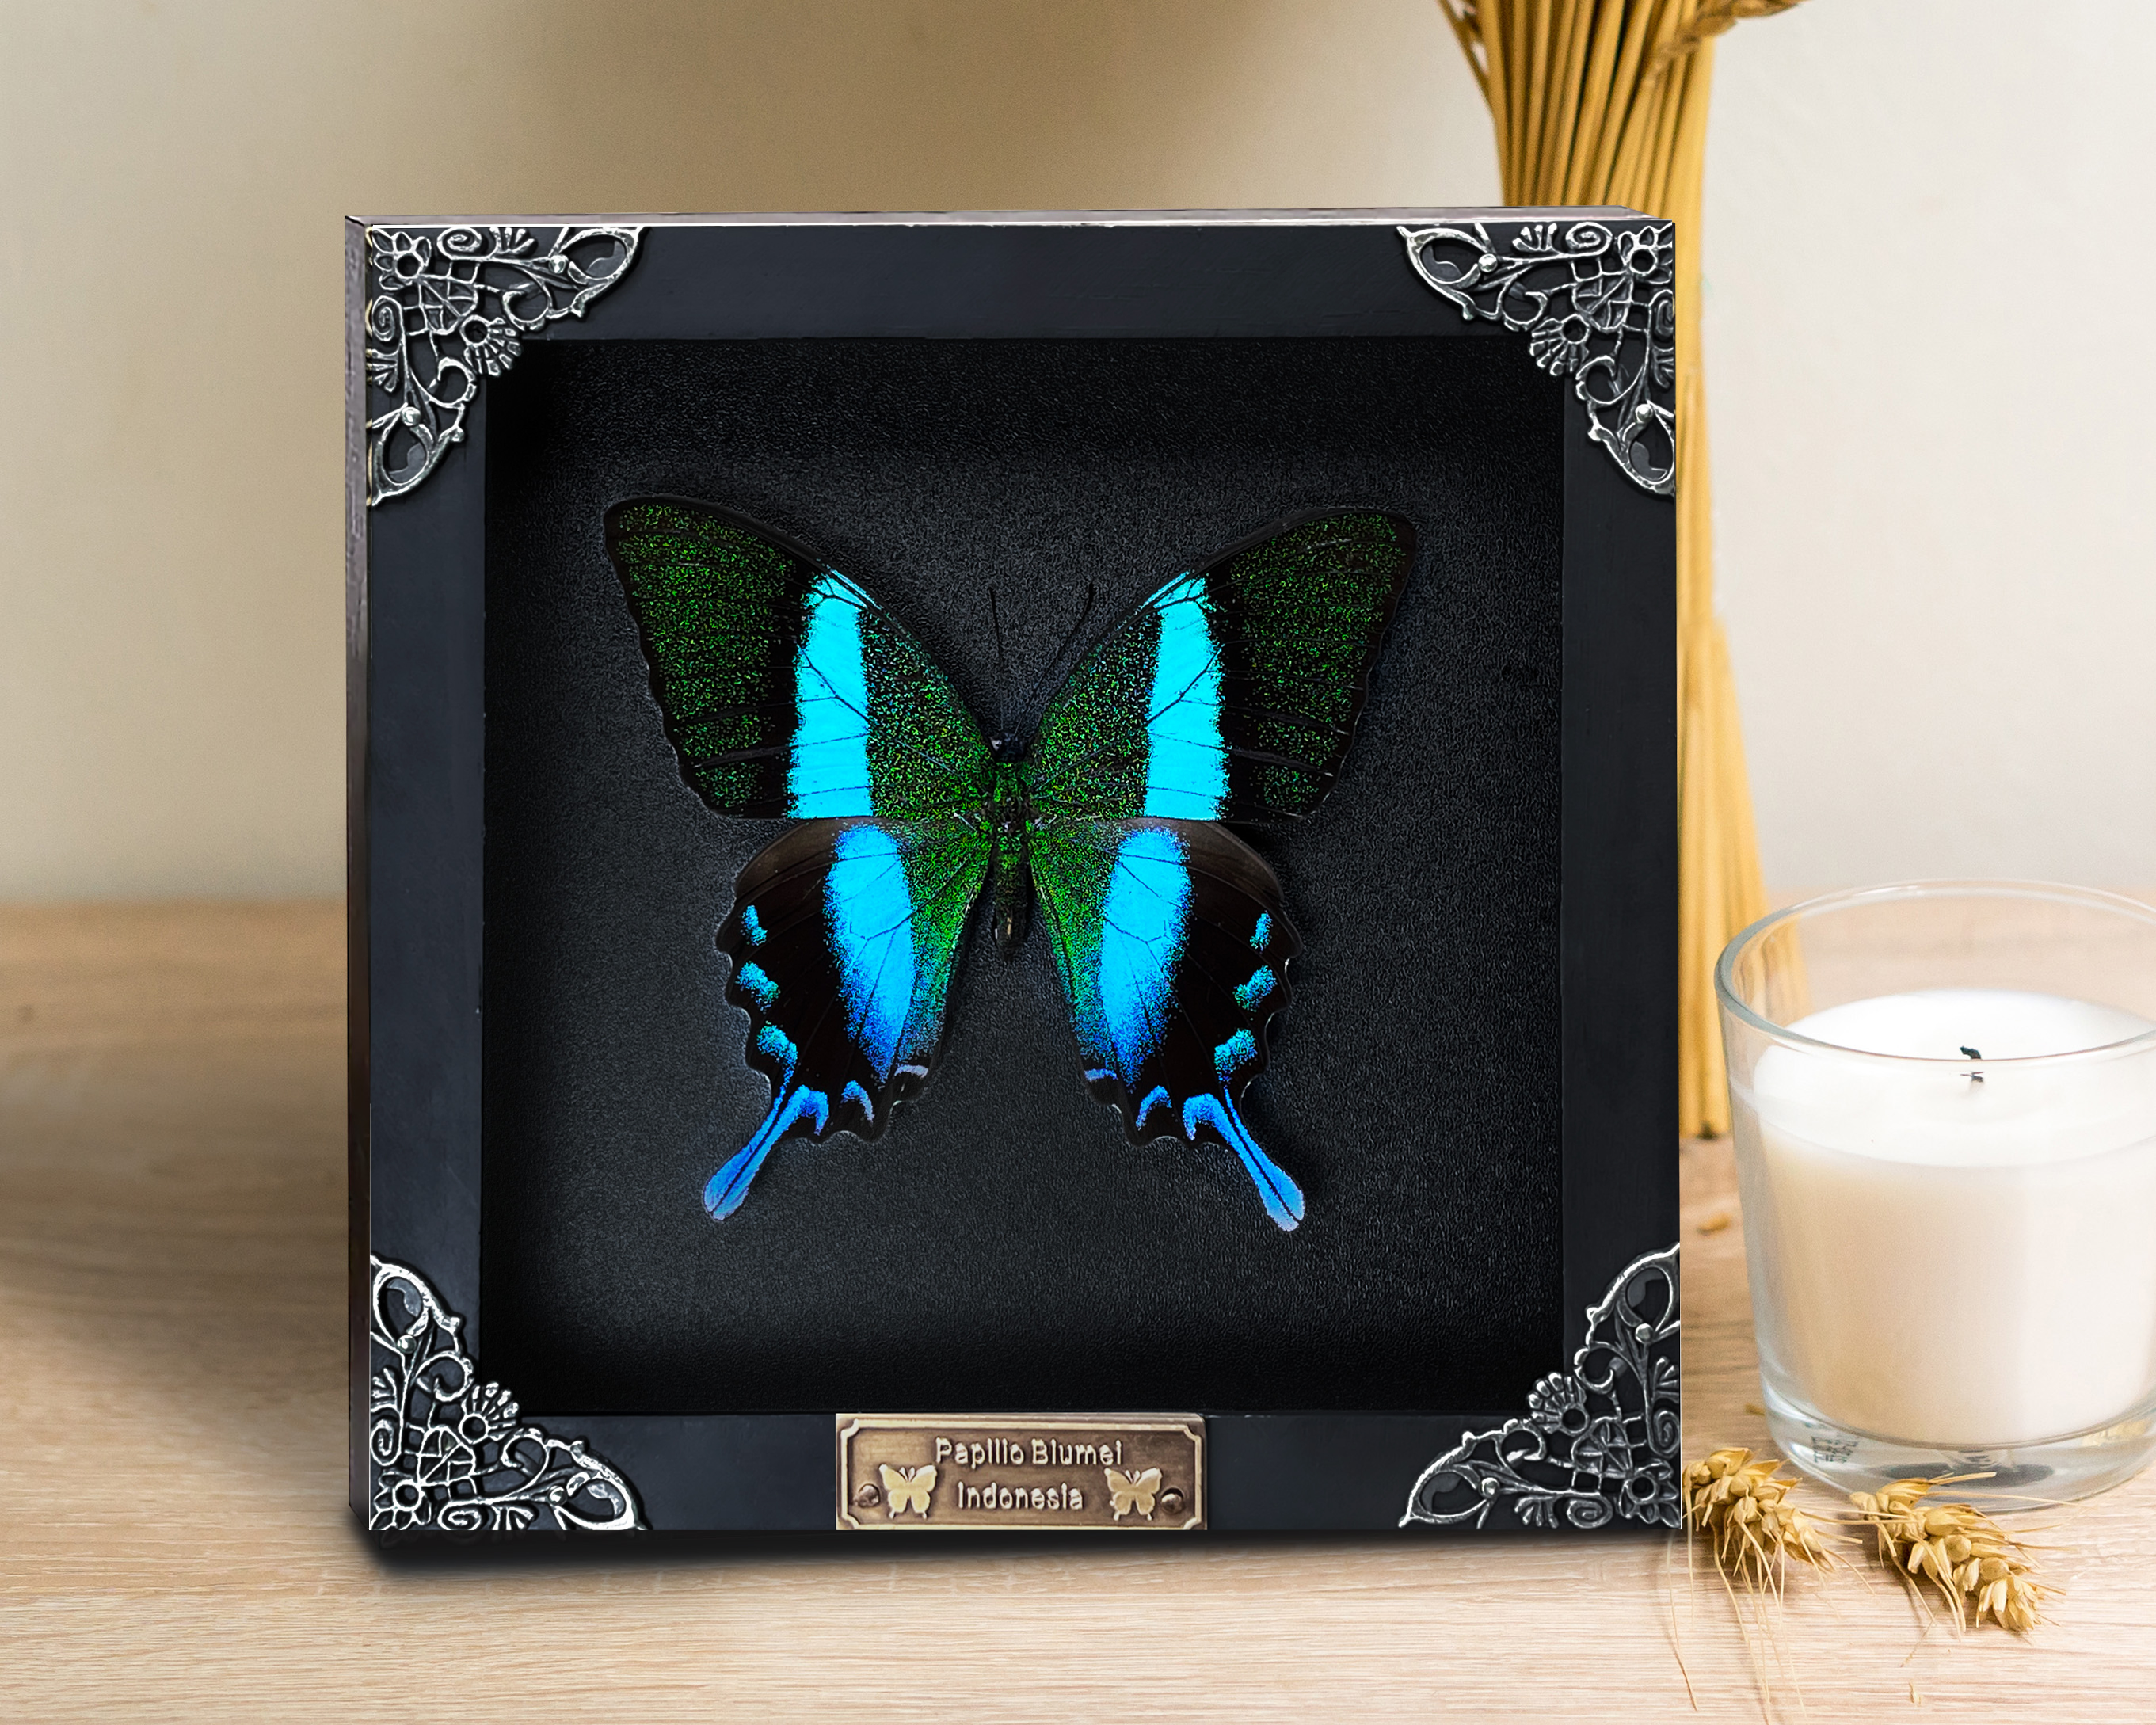 Real Framed Emerald Peacock Butterfly Moth Dead Insect Dried Shadow Box Frame Taxidermy Specimen Display Oddity Curiosities Wall Hanging Collection K16-23-DE